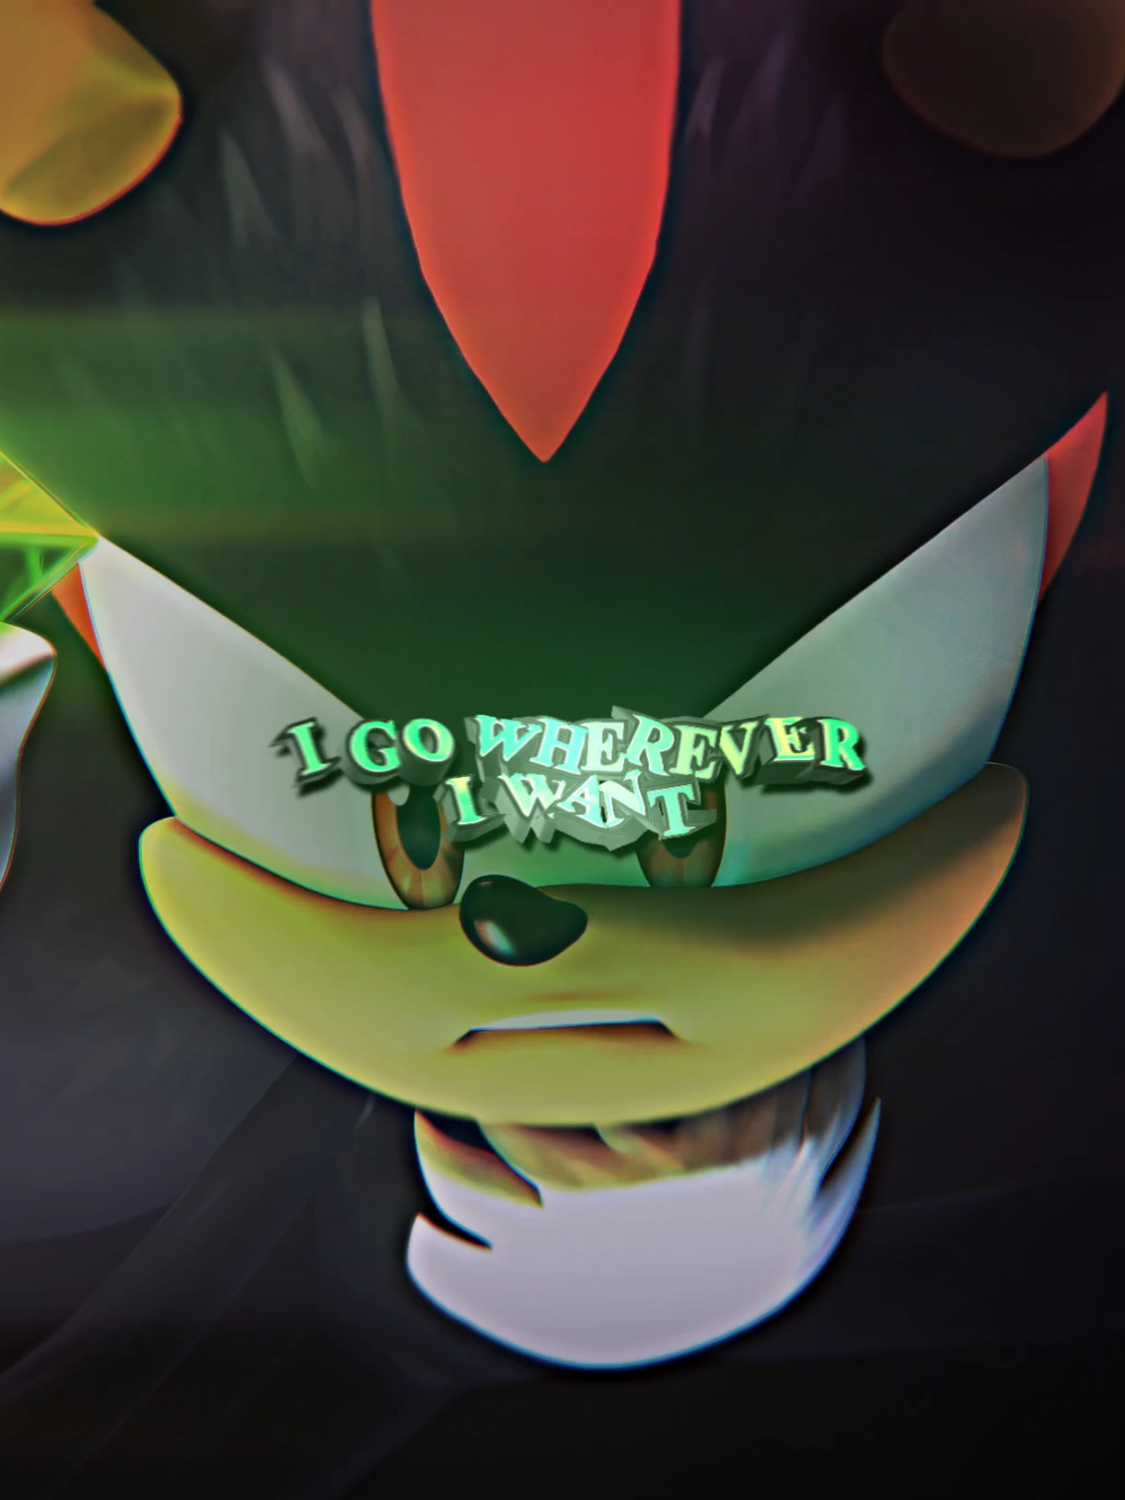 Shadow was tuff in Prime #shadow #shadowthehedgehog #shadowedit #shadowthehedgehogedit #shadowprime #shadowprimeedit #sonicprime #sonic #sonicedit #sonicprimeedit #sonicandshadow #netflix #aftereffects #edit